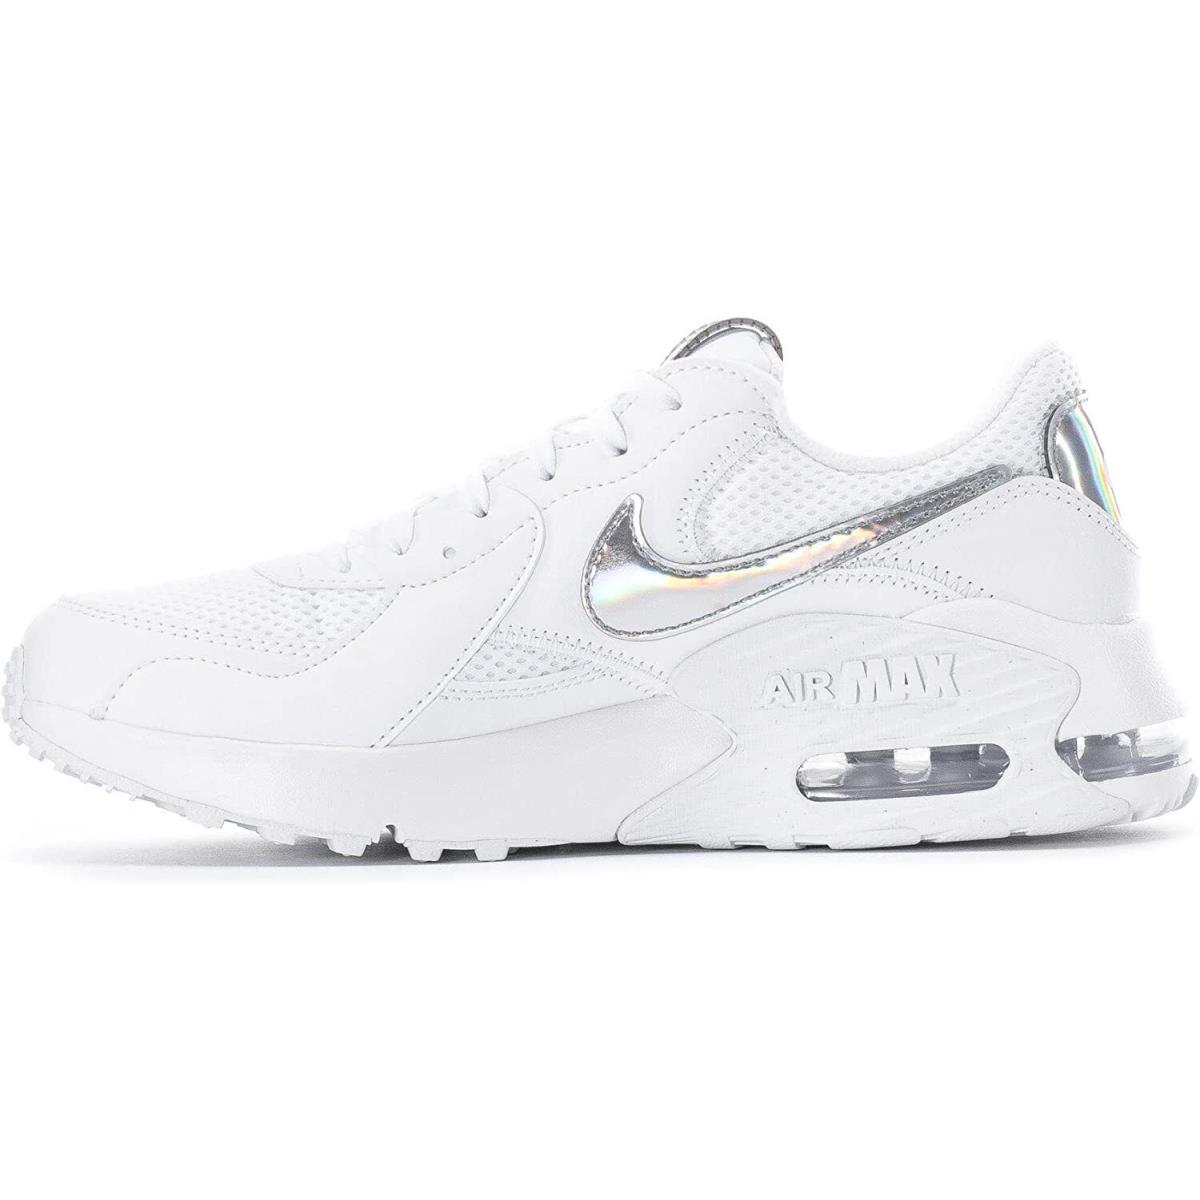 Nike Women`s Air Max Excee White/multi-color DJ6001 100 8 9 9.5